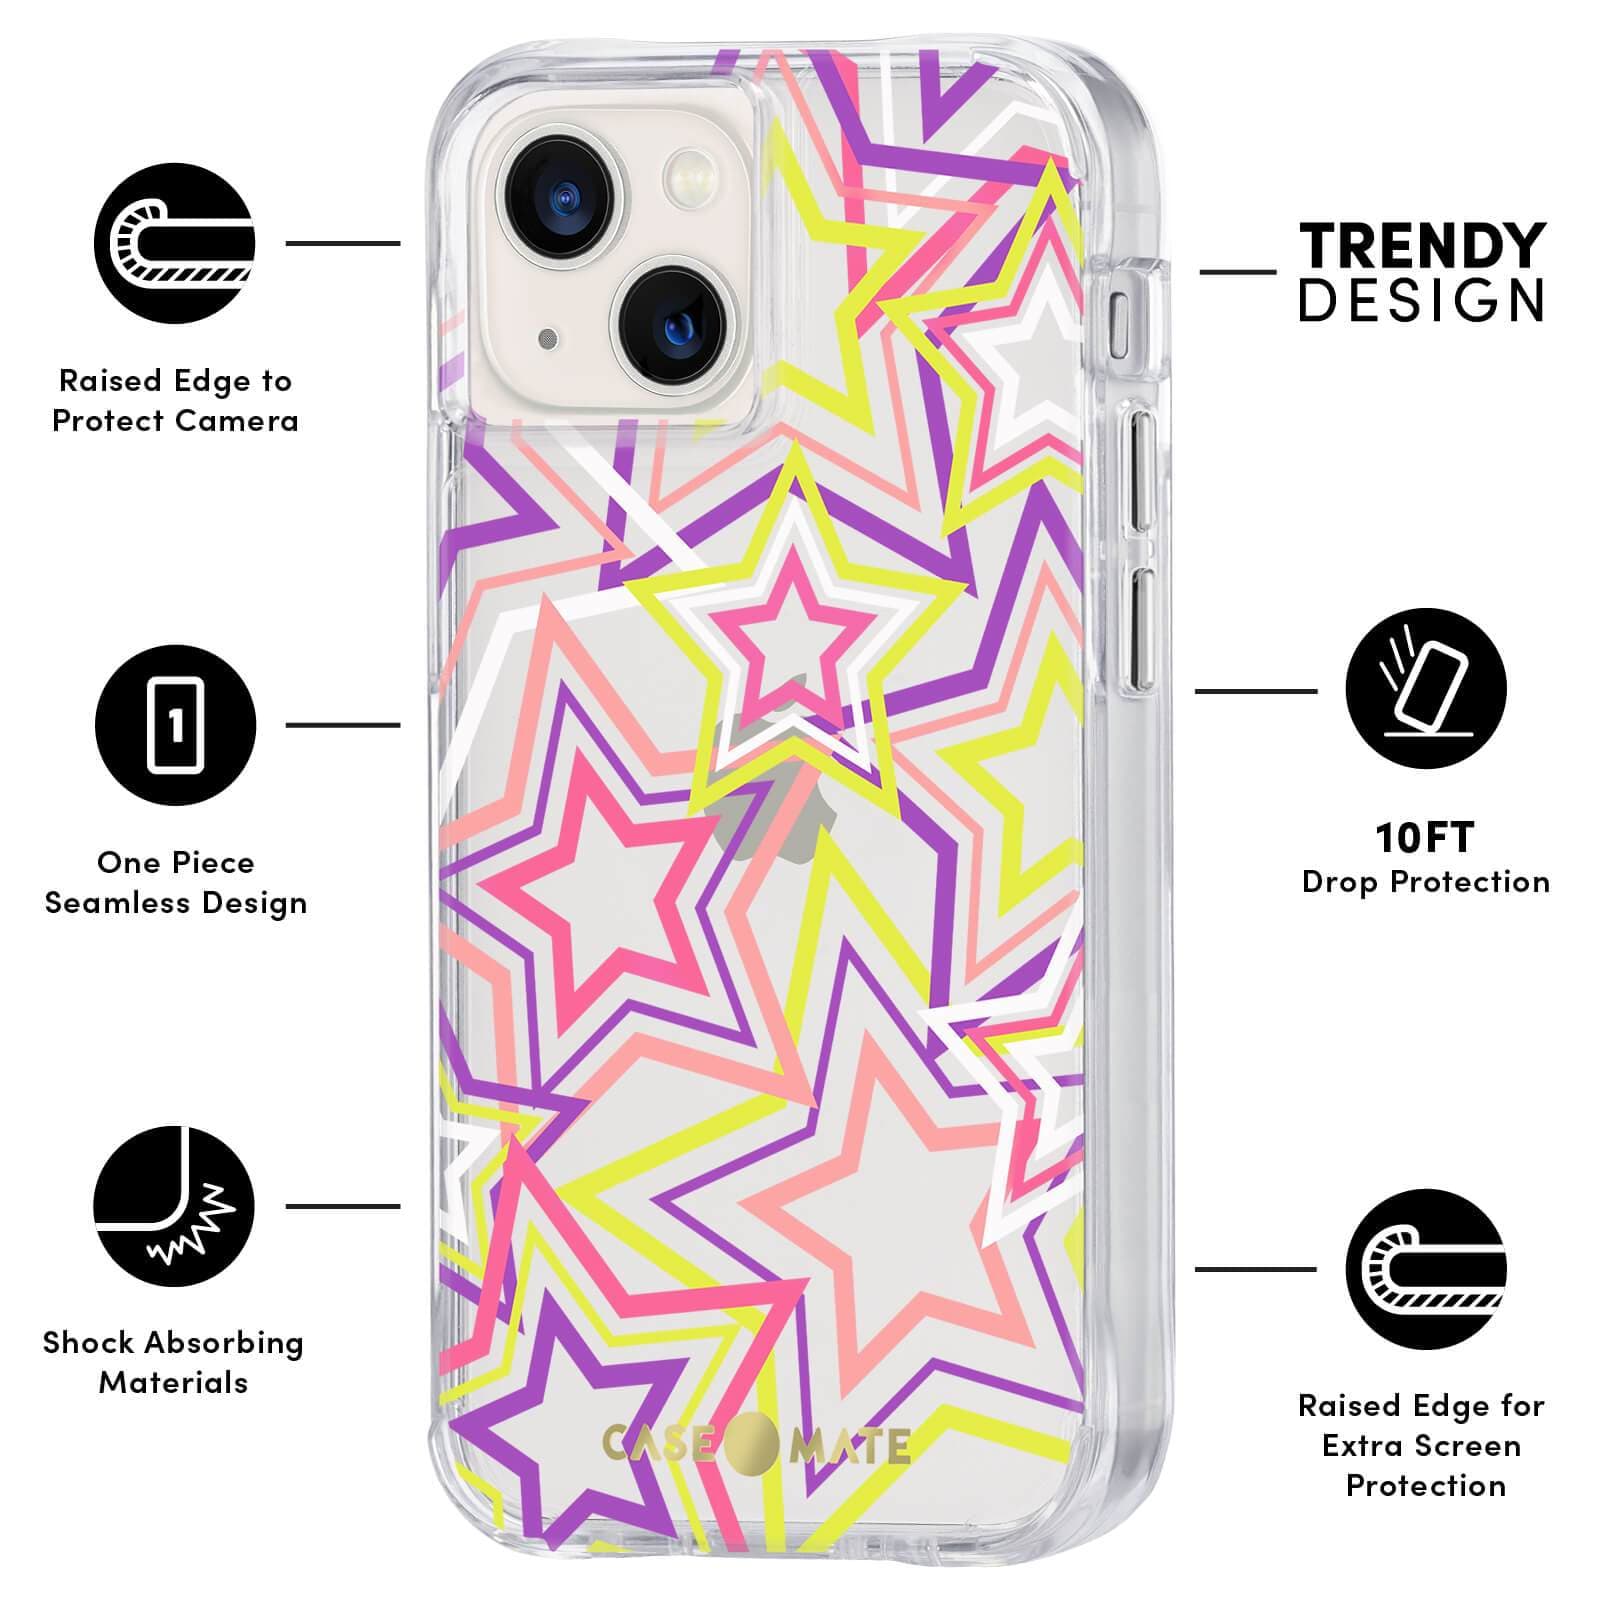 FEATURES: RAISED EDGE TO PROTECT CAMERA, ONE PIECE SEAMLESS DESIGN, SHOCK ABSORBING MATERIALS, TRENDY DESIGN, 10FT DROP PROTECTION, RAISED EDGE FOR EXTRA SCREEN PROTECTION. COLOR::NEON STARS